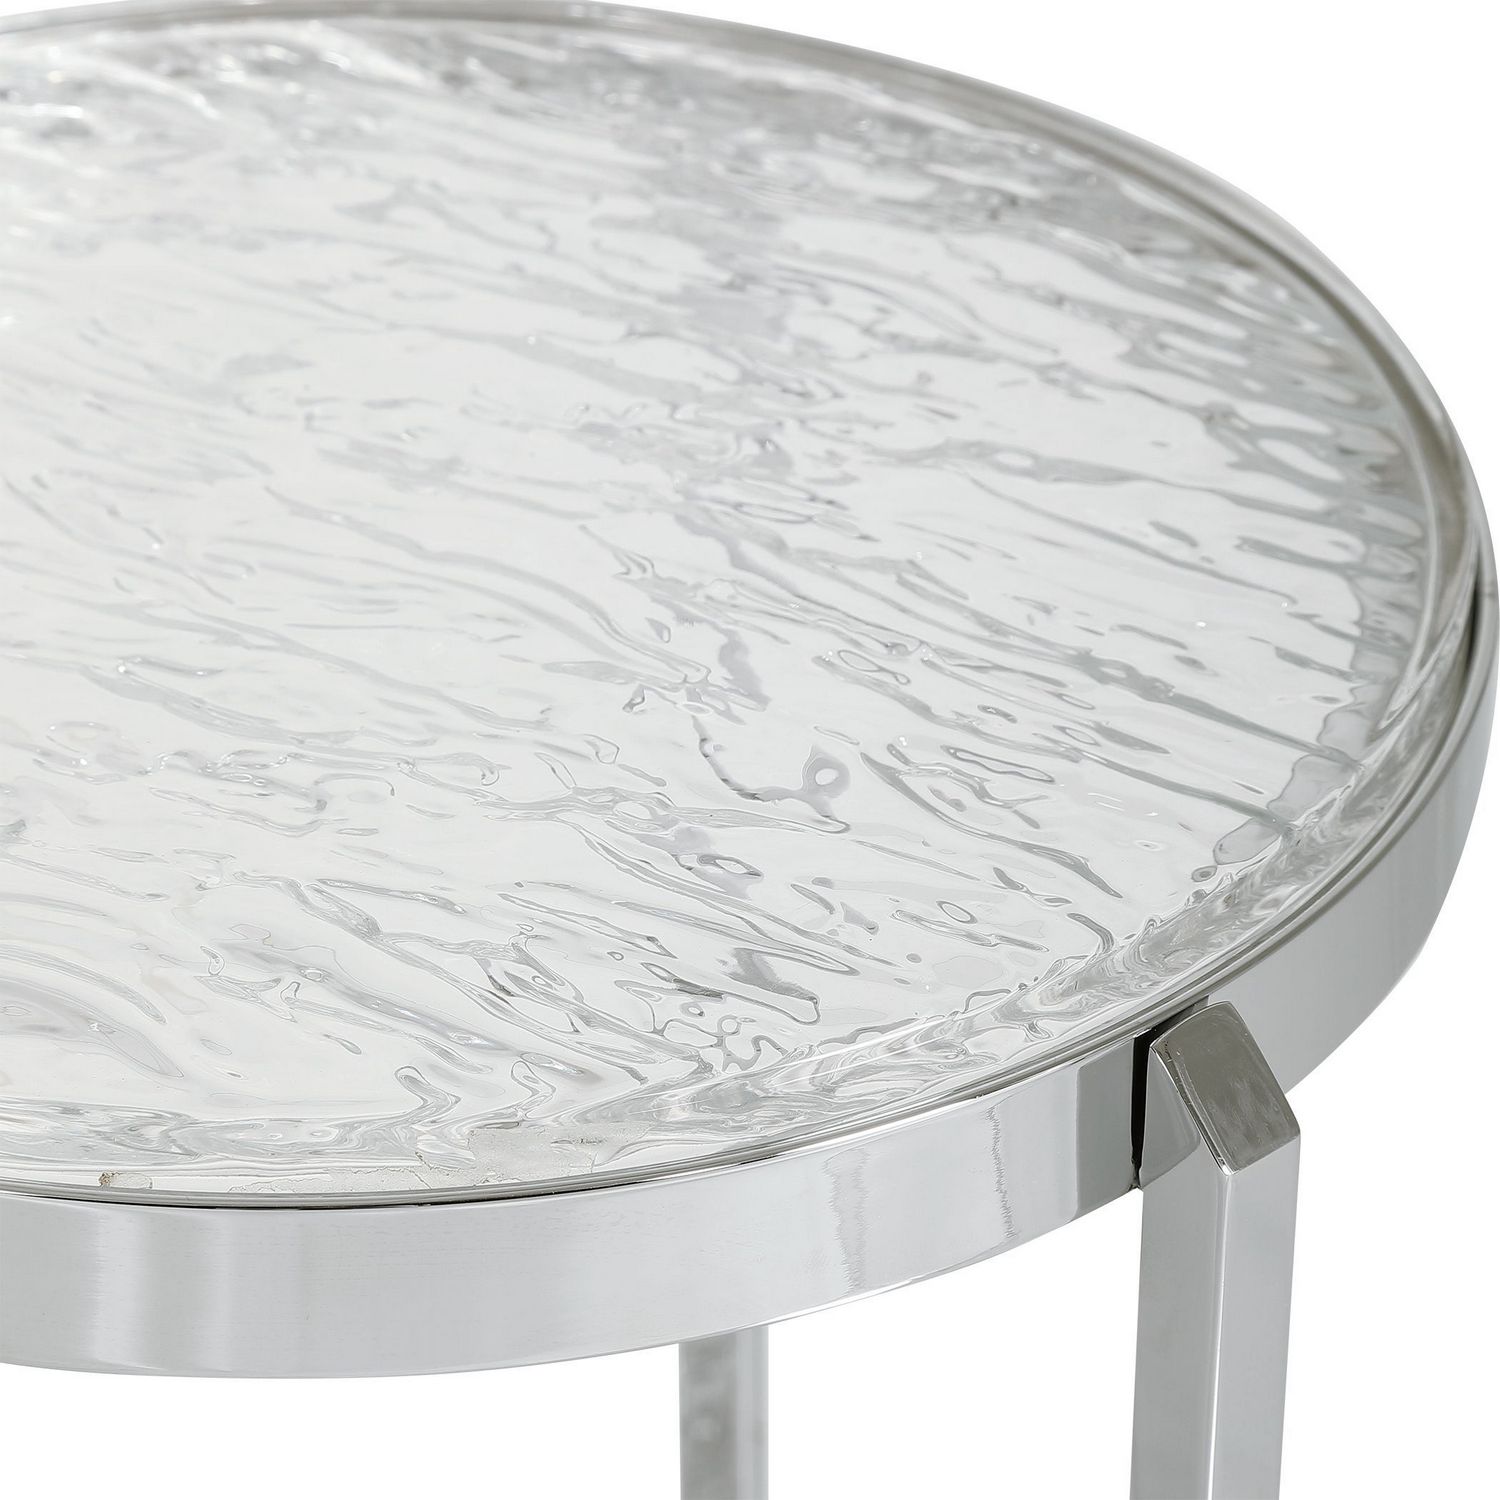 Uttermost Clarence Accent Table - Textured Glass